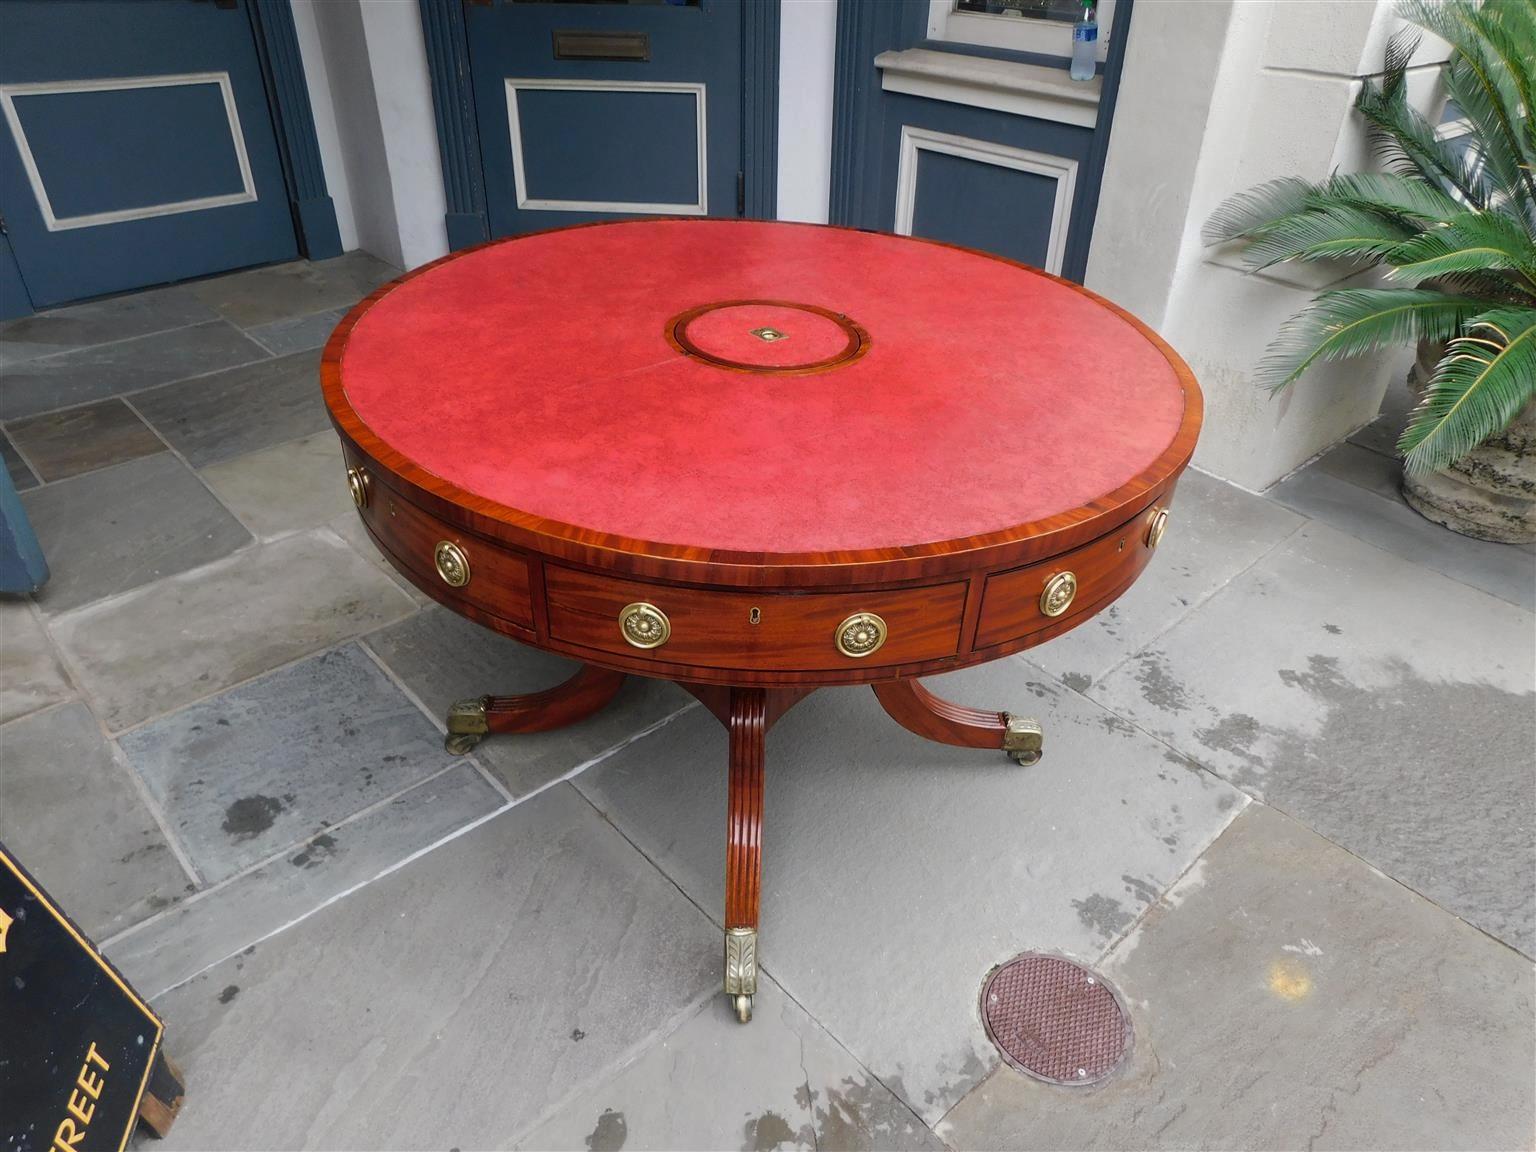 English Regency mahogany circular rotating leather top rent table with centered removable deposit lid, alternating four drawers, brass pulls, ebony string inlay, supported by a turned ringed pedestal resting on four reeded saber legs with the